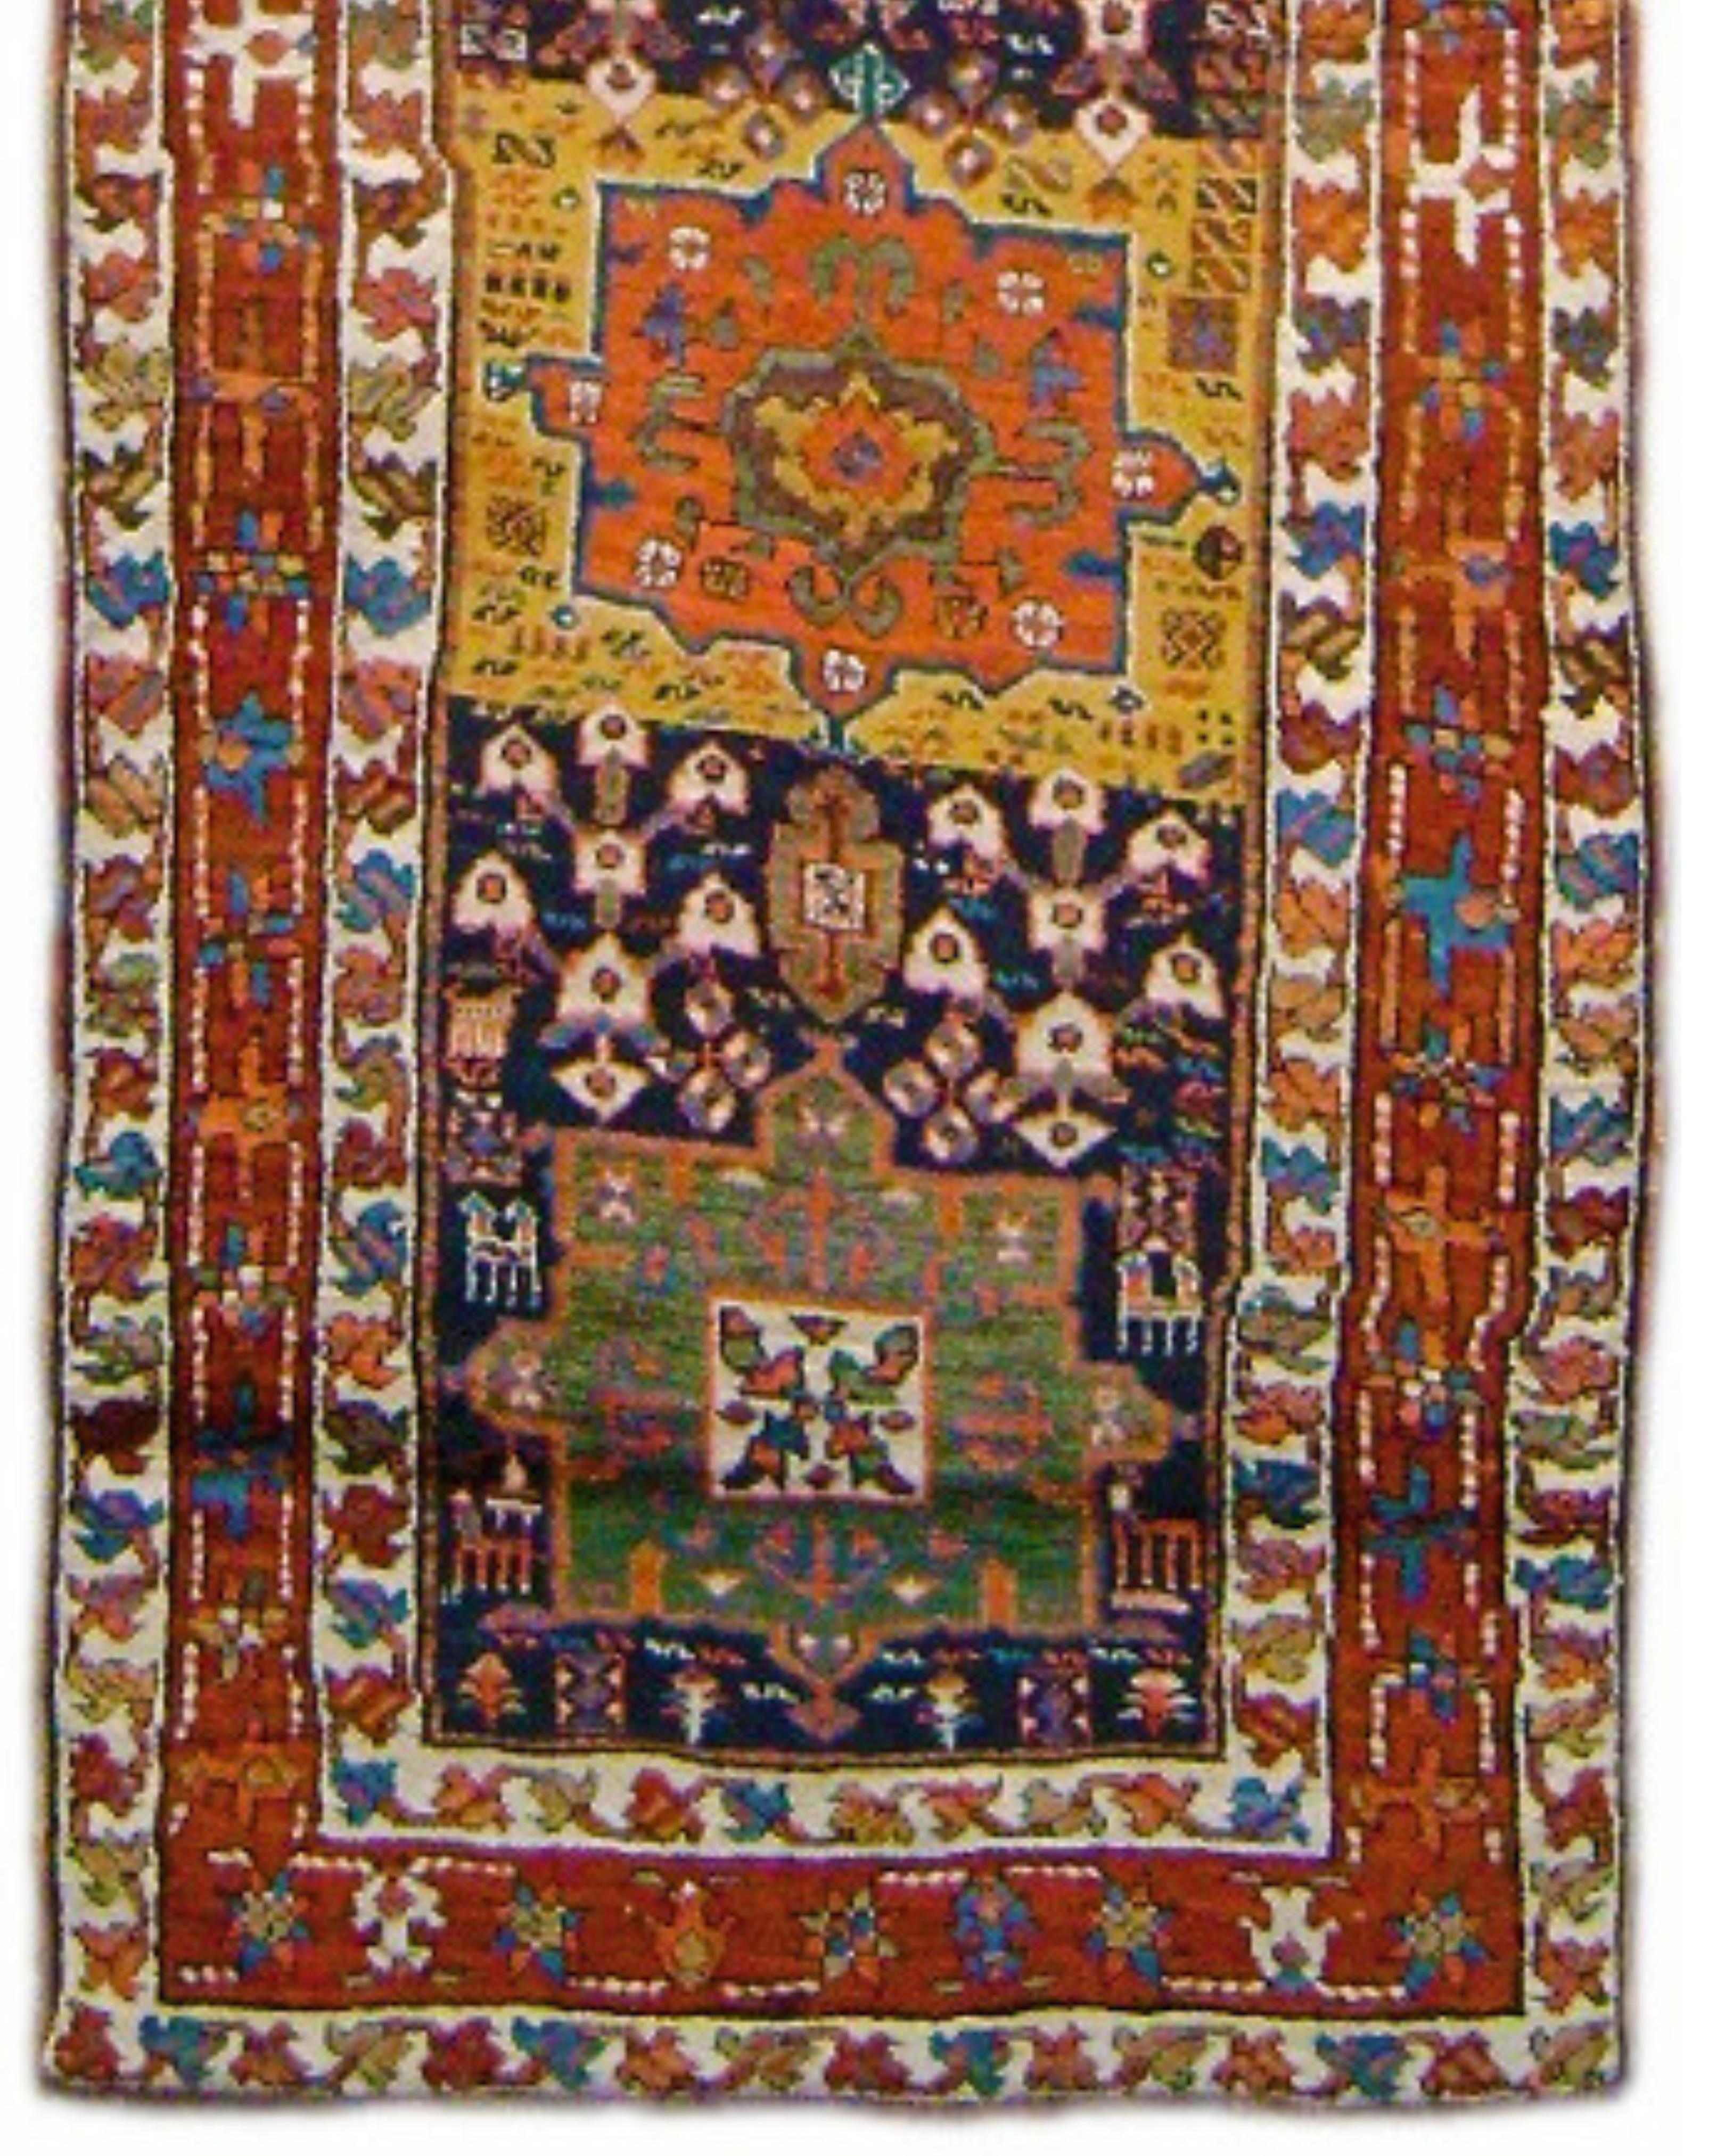 Hand-Woven Antique Persian Karadagh Rug, 19th Century For Sale